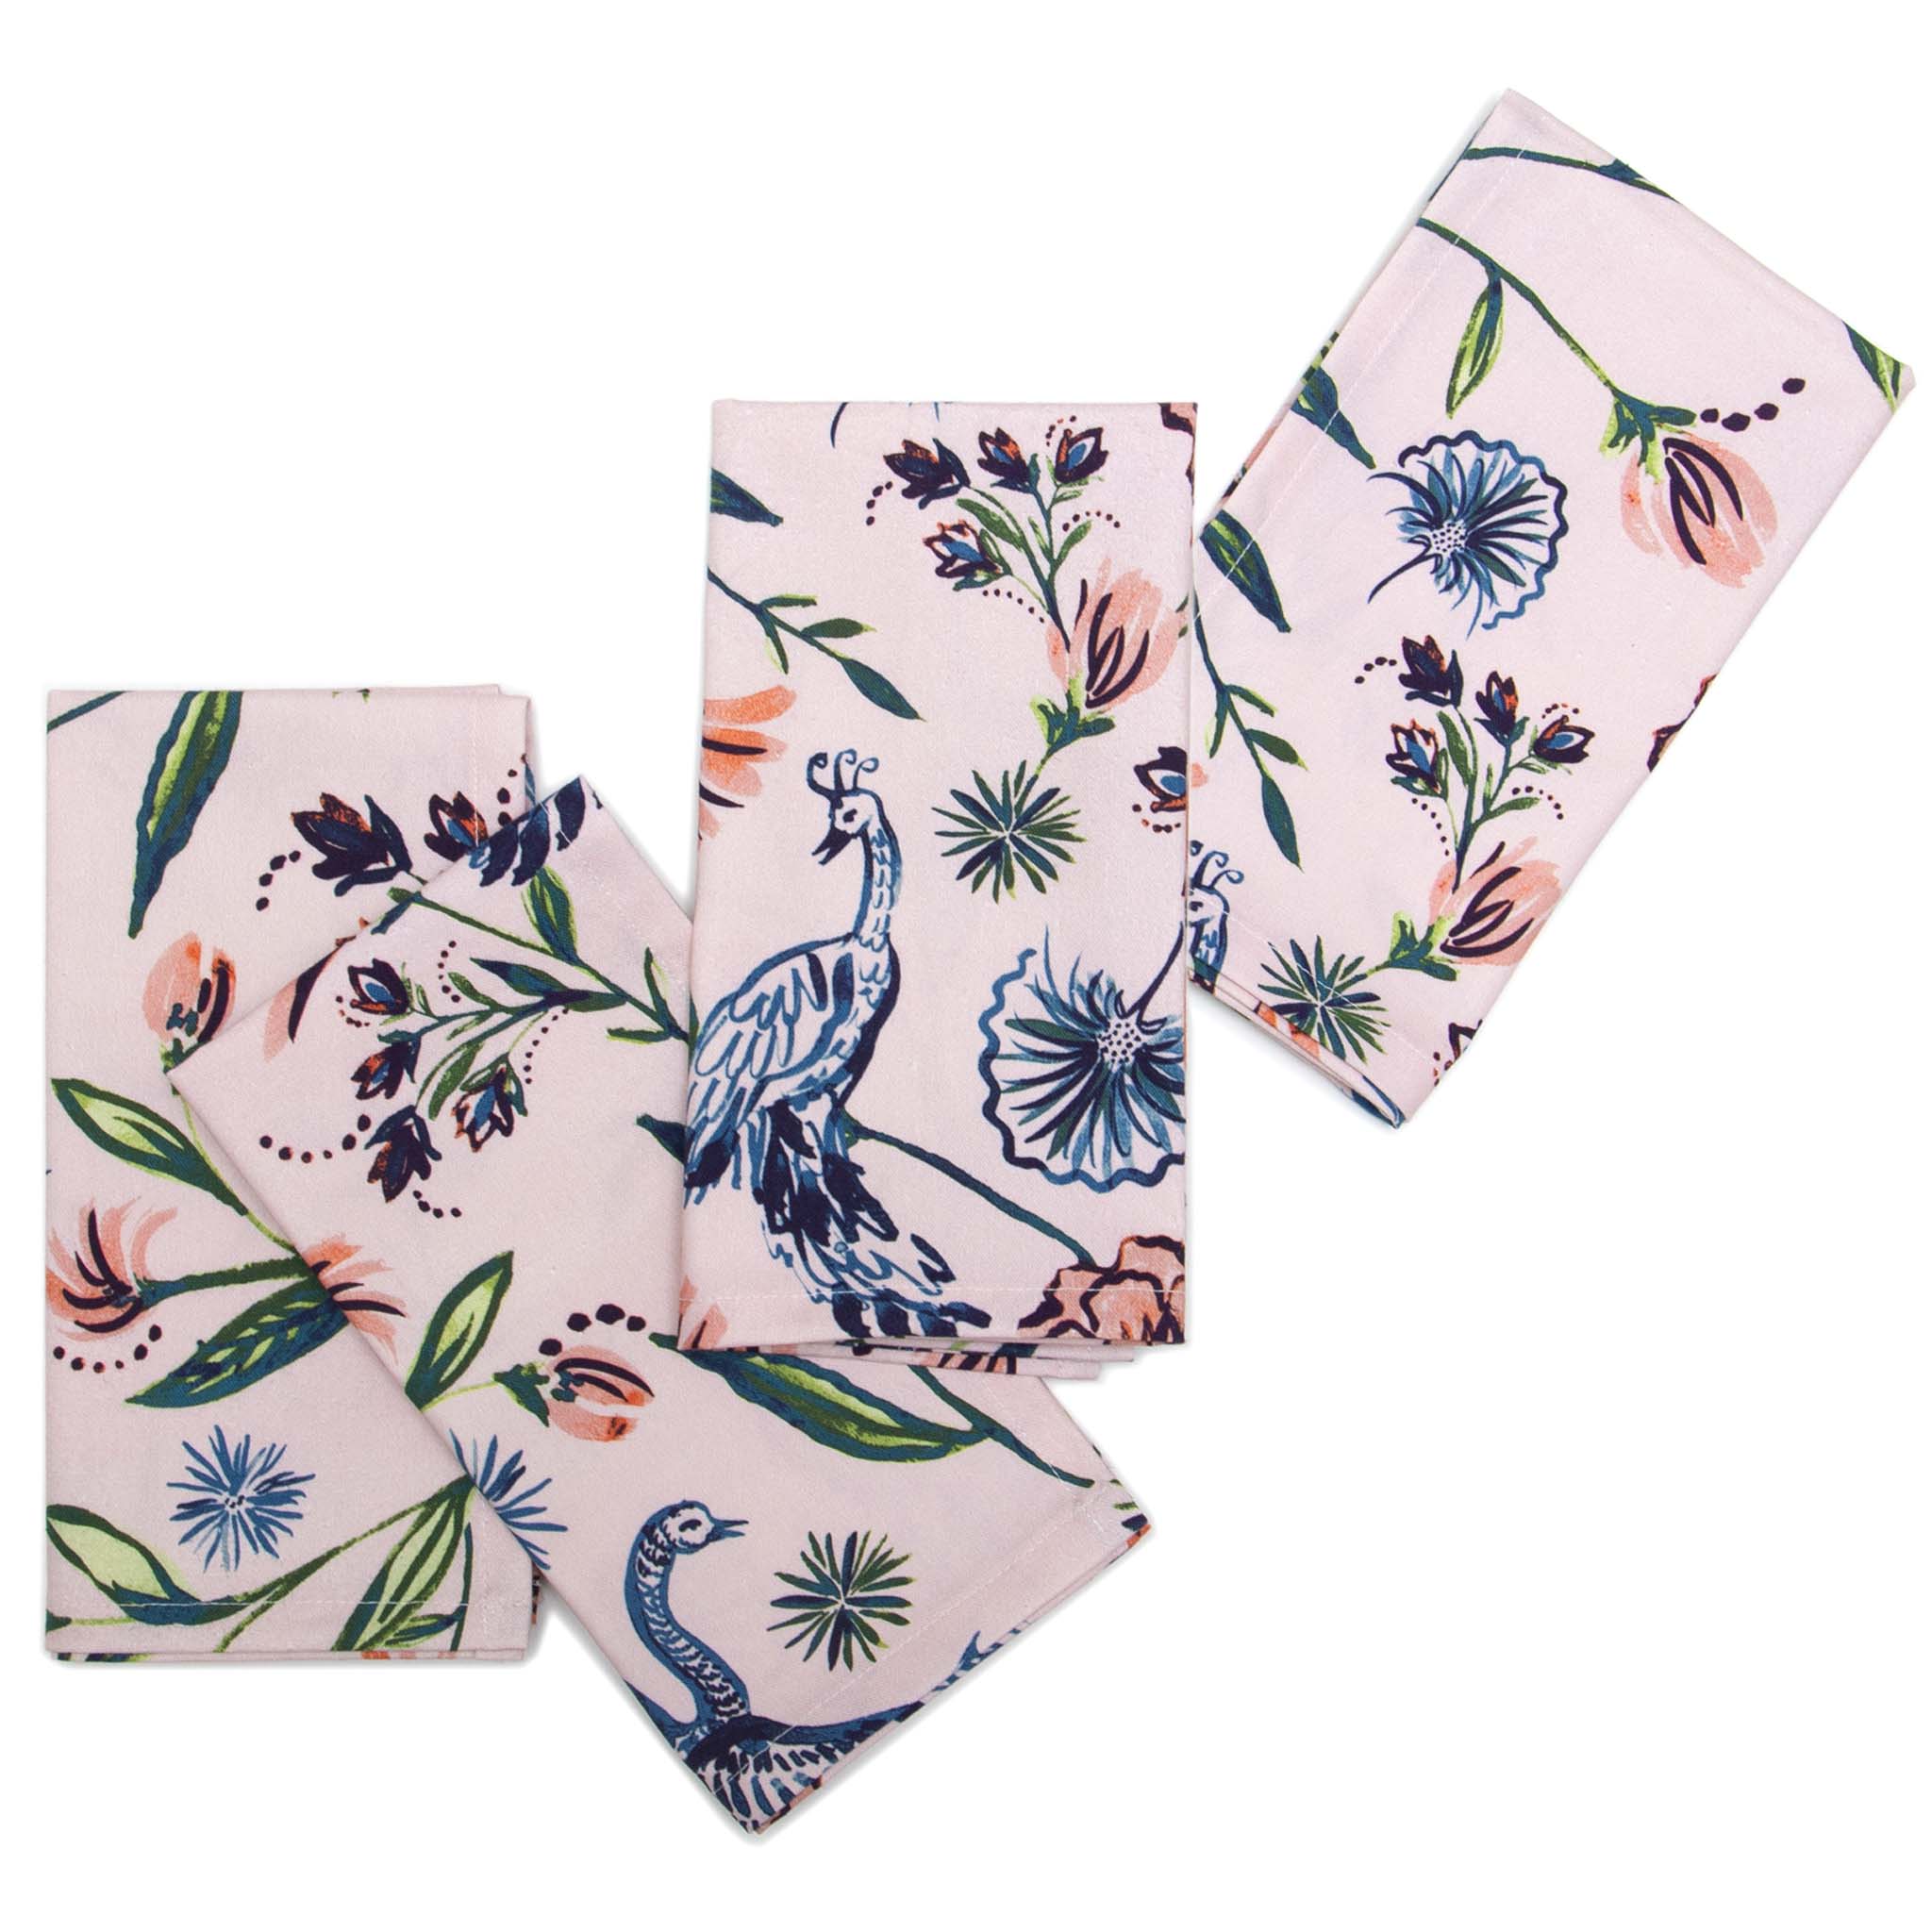 Four Pink Chinoiserie Printed Napkins Folded